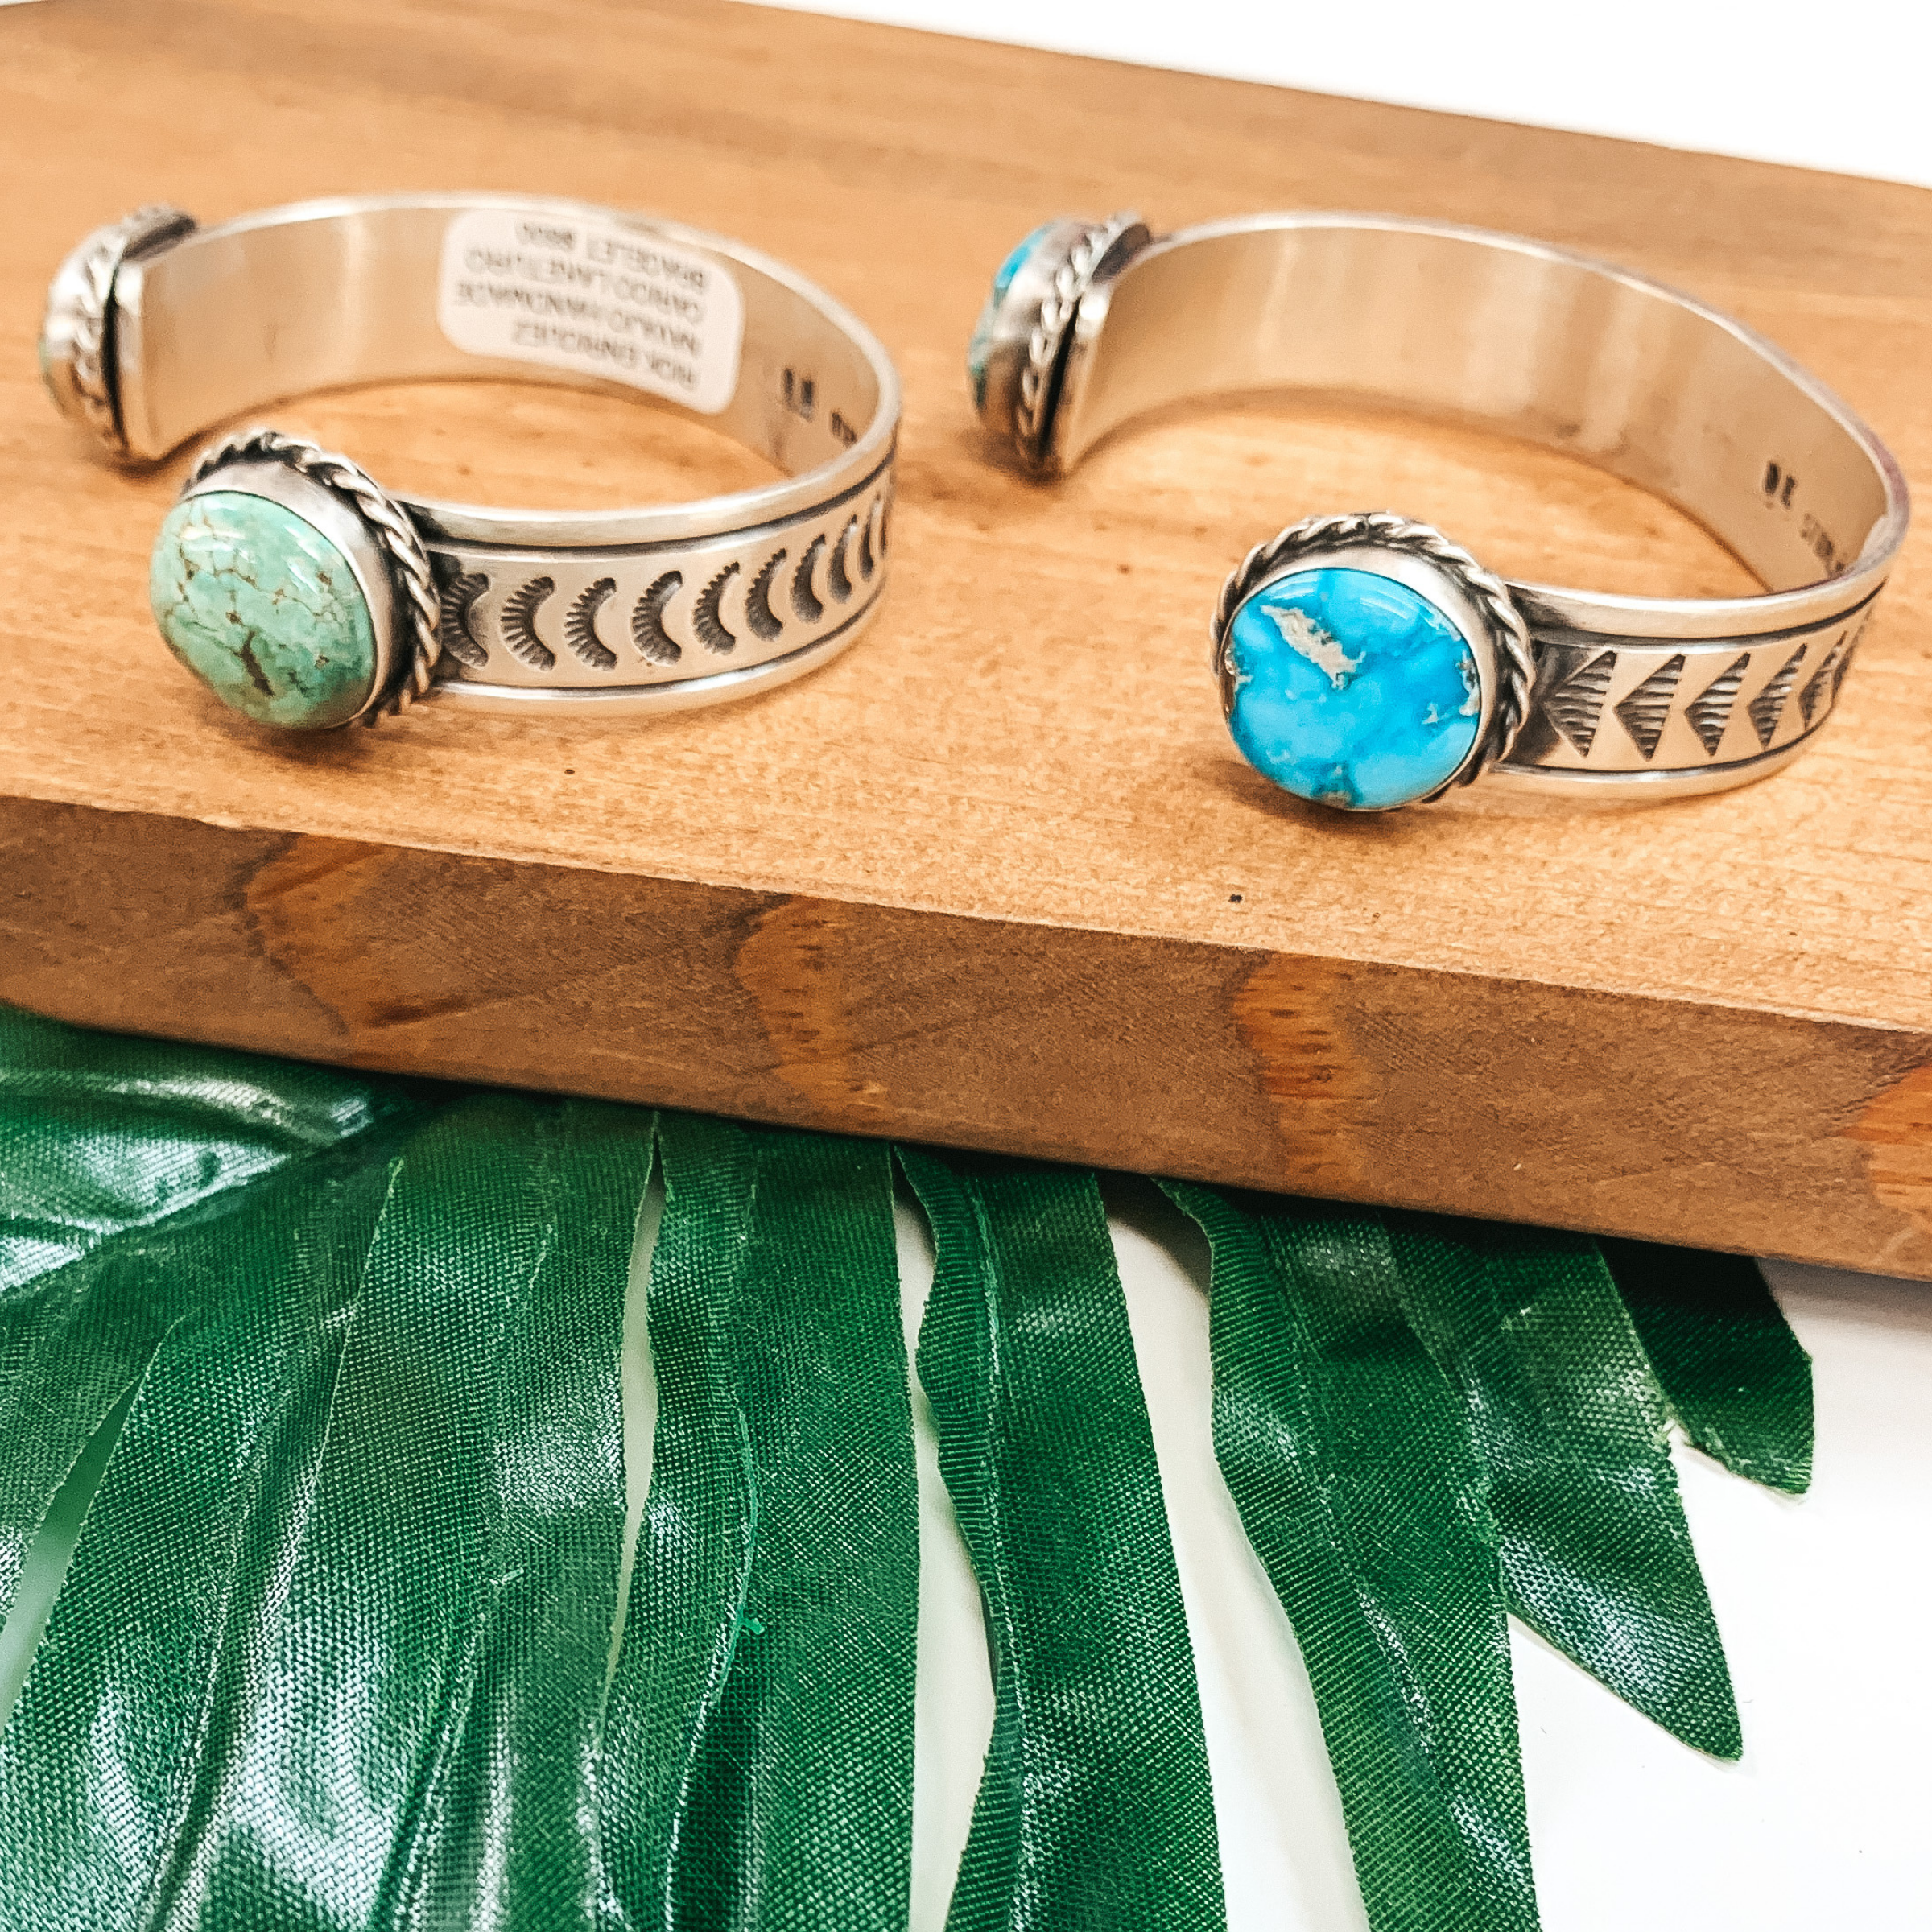 Rick Enricuez | Navajo Handmade Detailed Sterling Silver Cuff with Kingman Turquoise Endings - Giddy Up Glamour Boutique